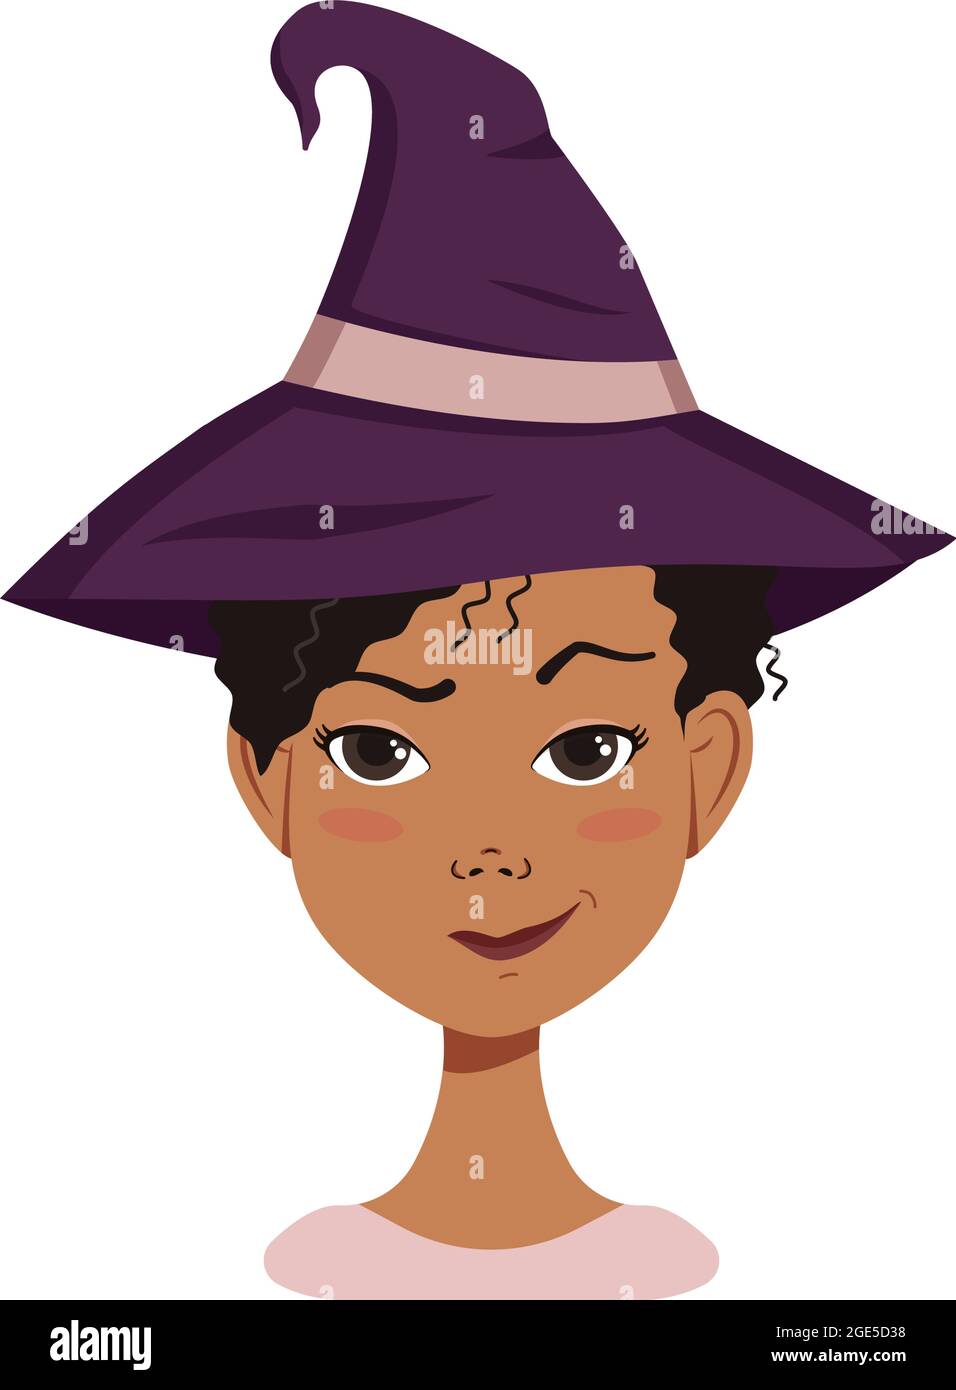 African American female avatar with black curly hair, emotions of suspicion, frowning face and pursed lips in a smirk, wearing a witch hat. Halloween character in costume Stock Vector